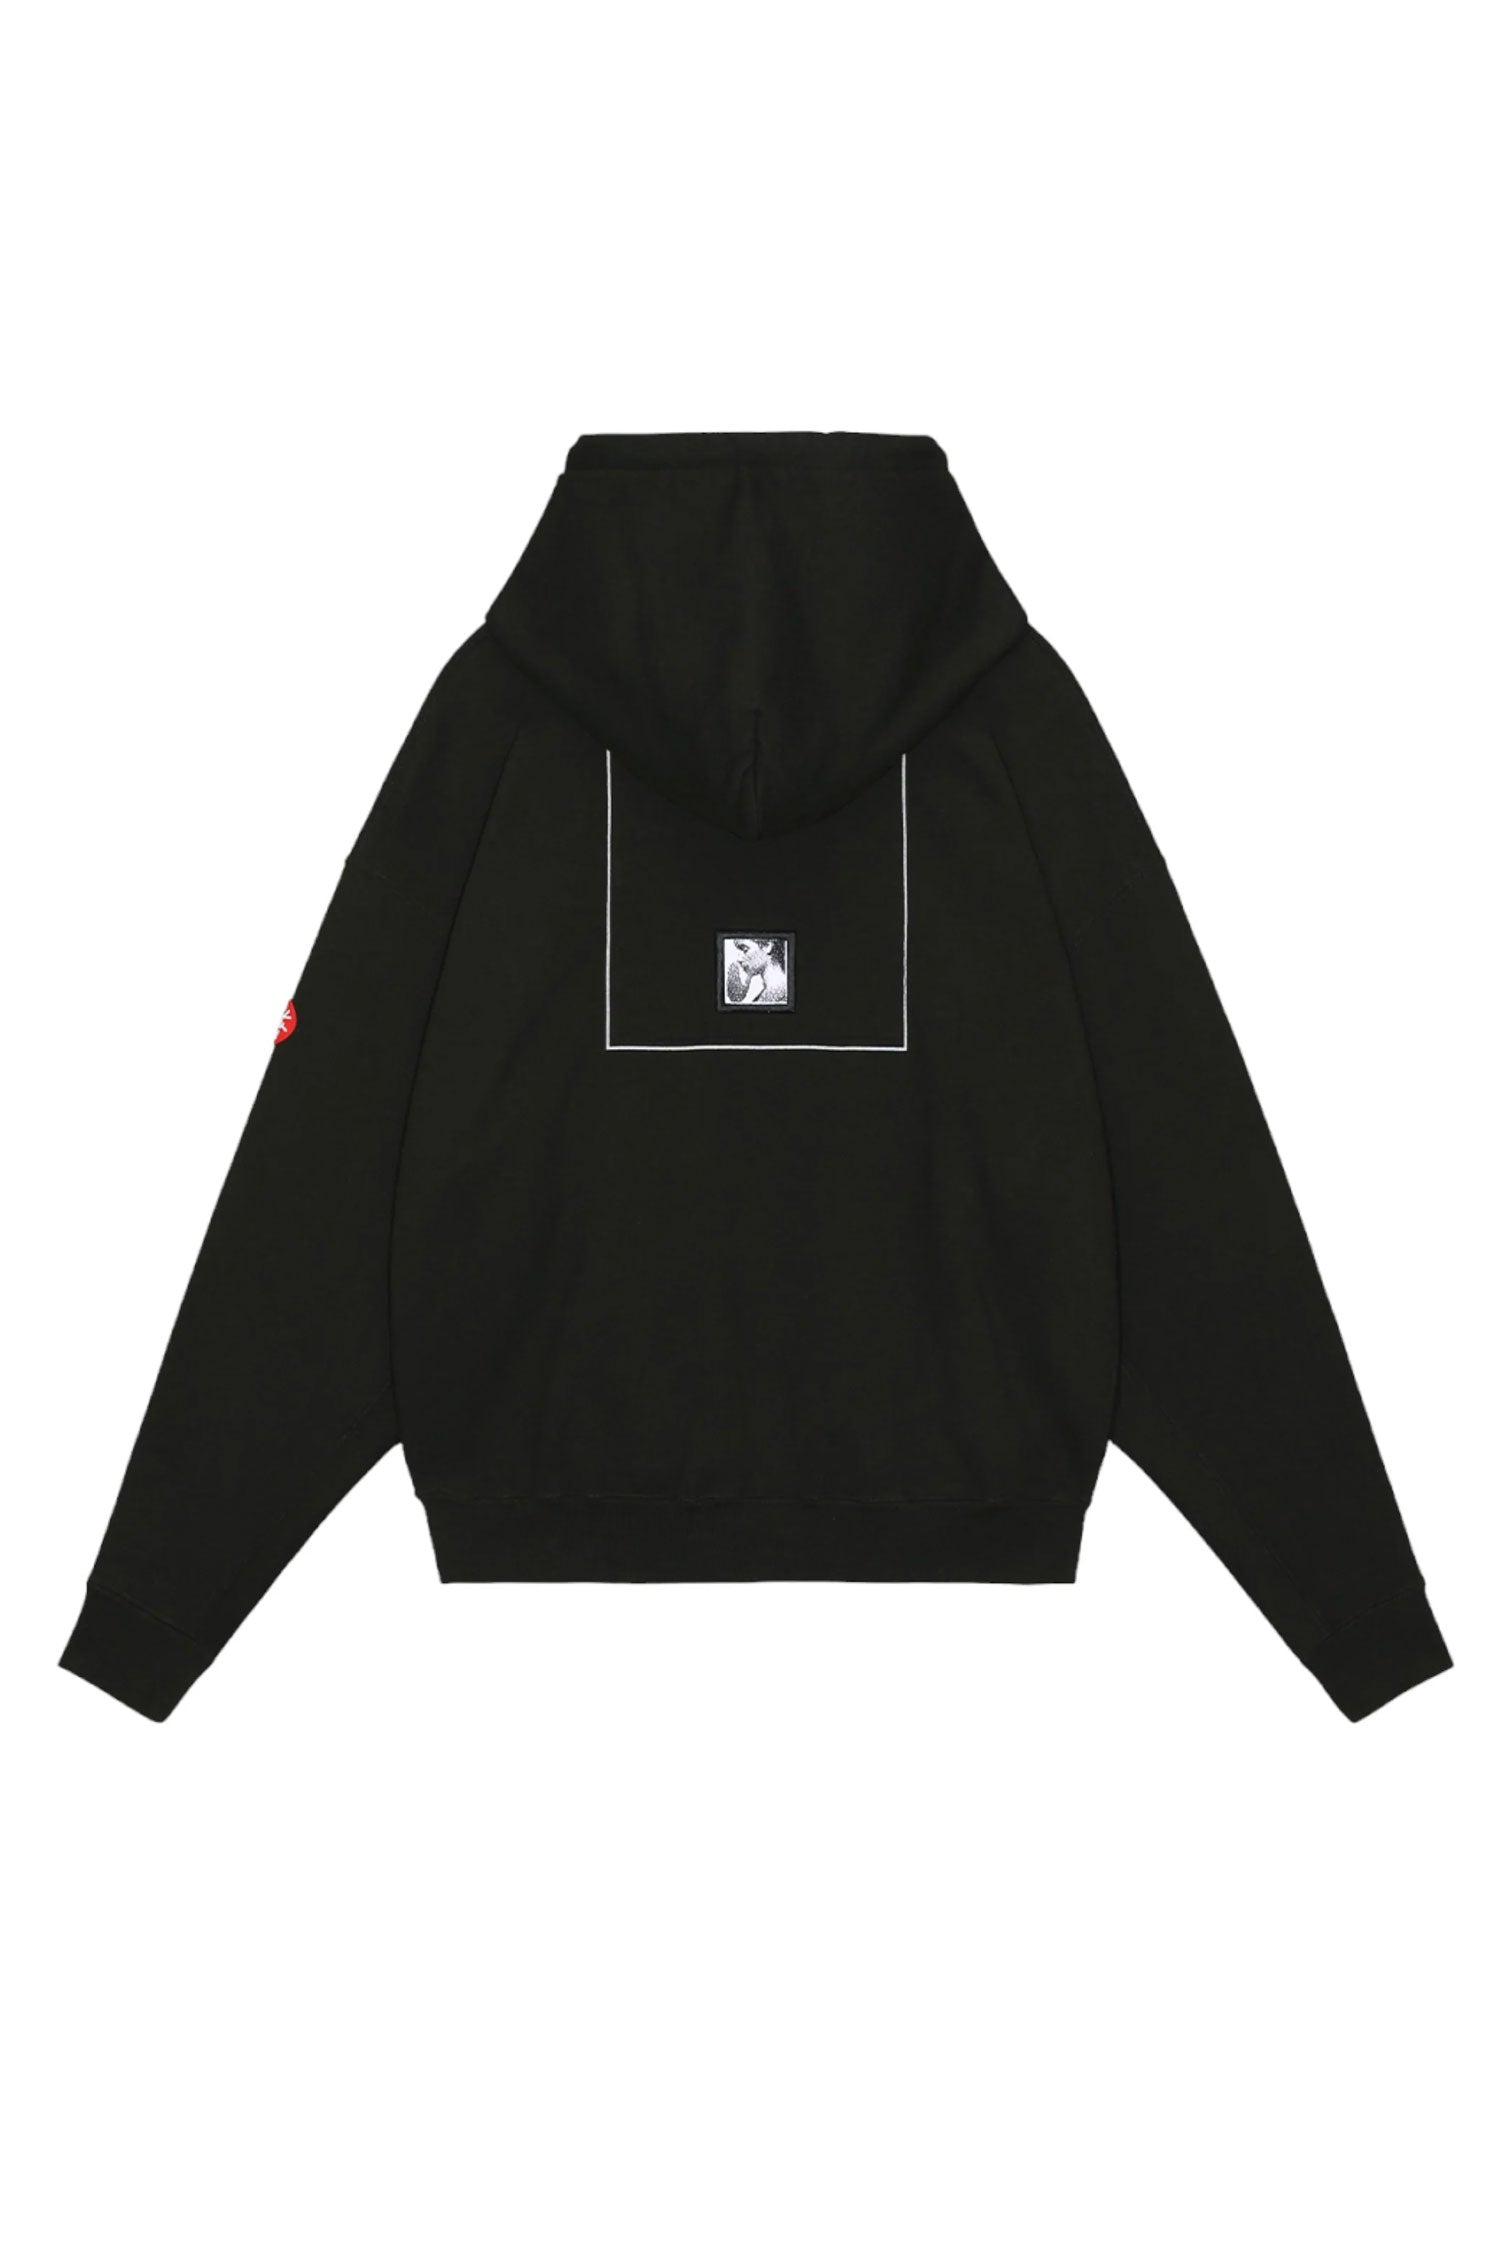 The CAV EMPT - ZIG MODEL HOODY  available online with global shipping, and in PAM Stores Melbourne and Sydney.